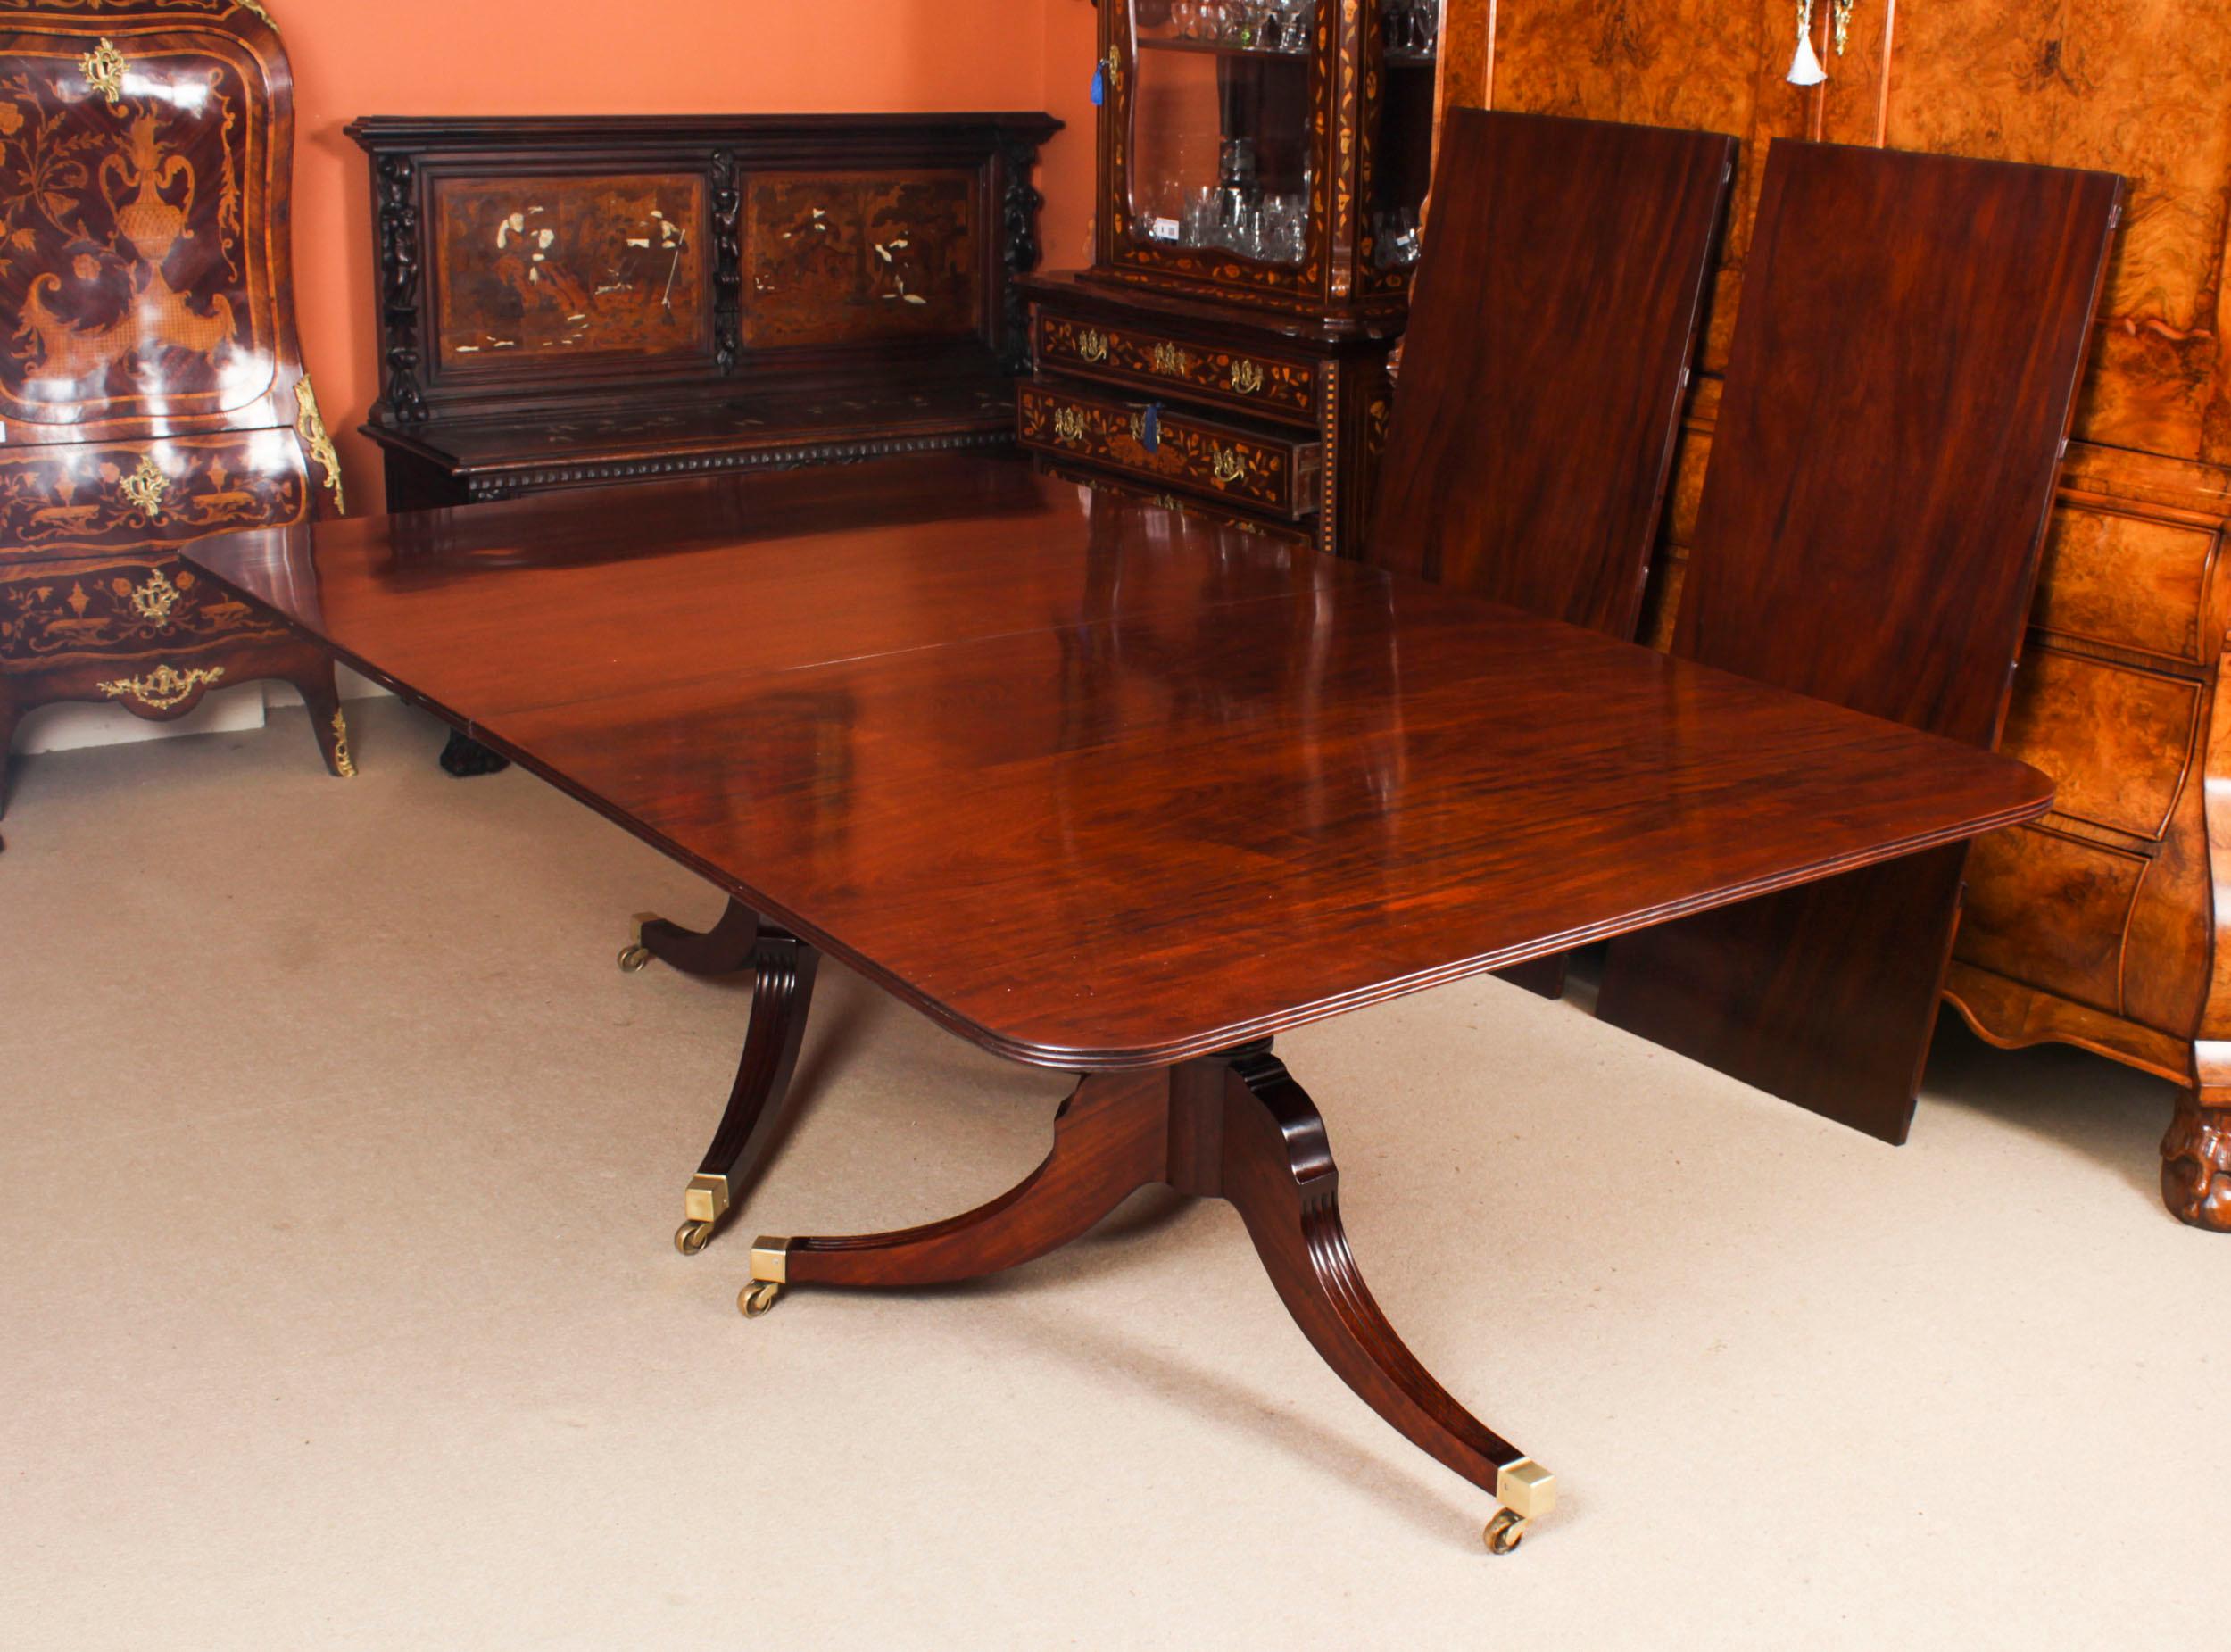 Antique 14ft Flame Mahogany Regency Revival Triple Pillar Dining Table 19th C For Sale 3